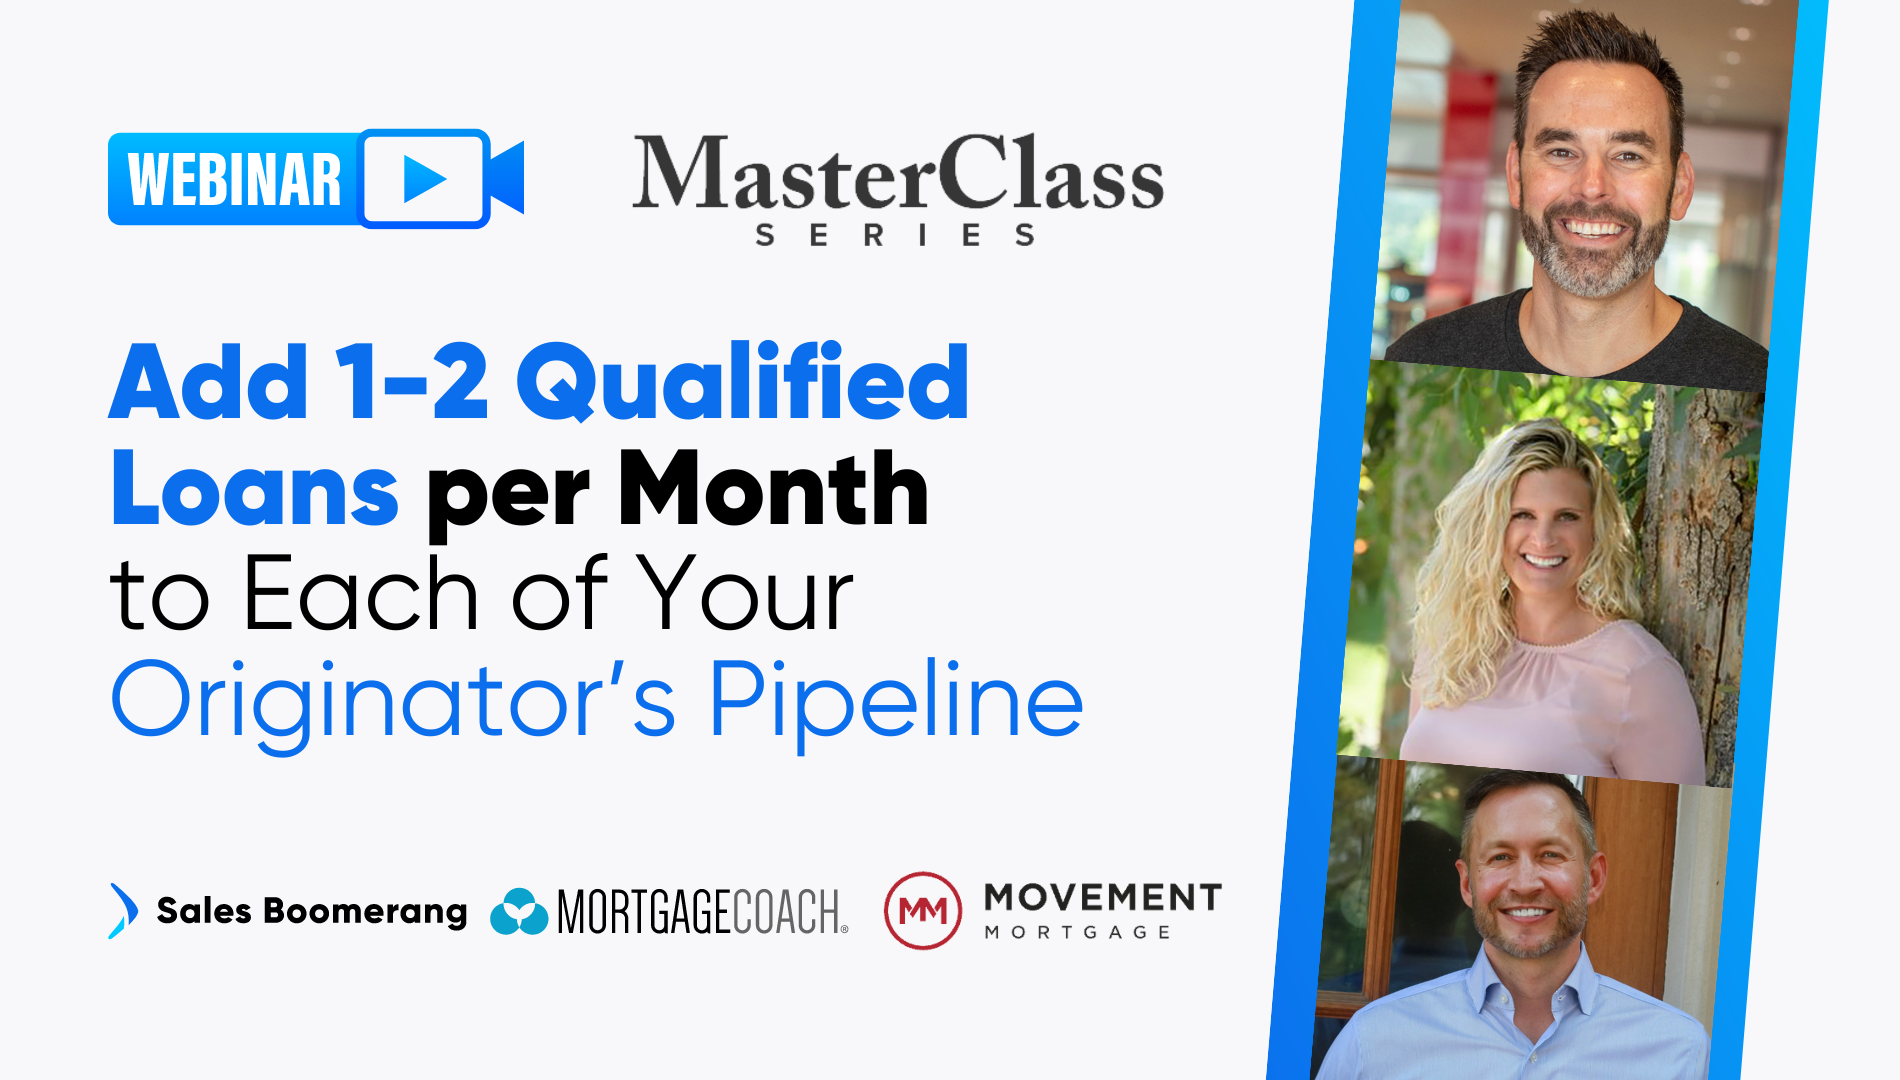 MasterClass #2: How to Add 1-2 Qualified Loans per Month to each of your Originator’s Pipeline